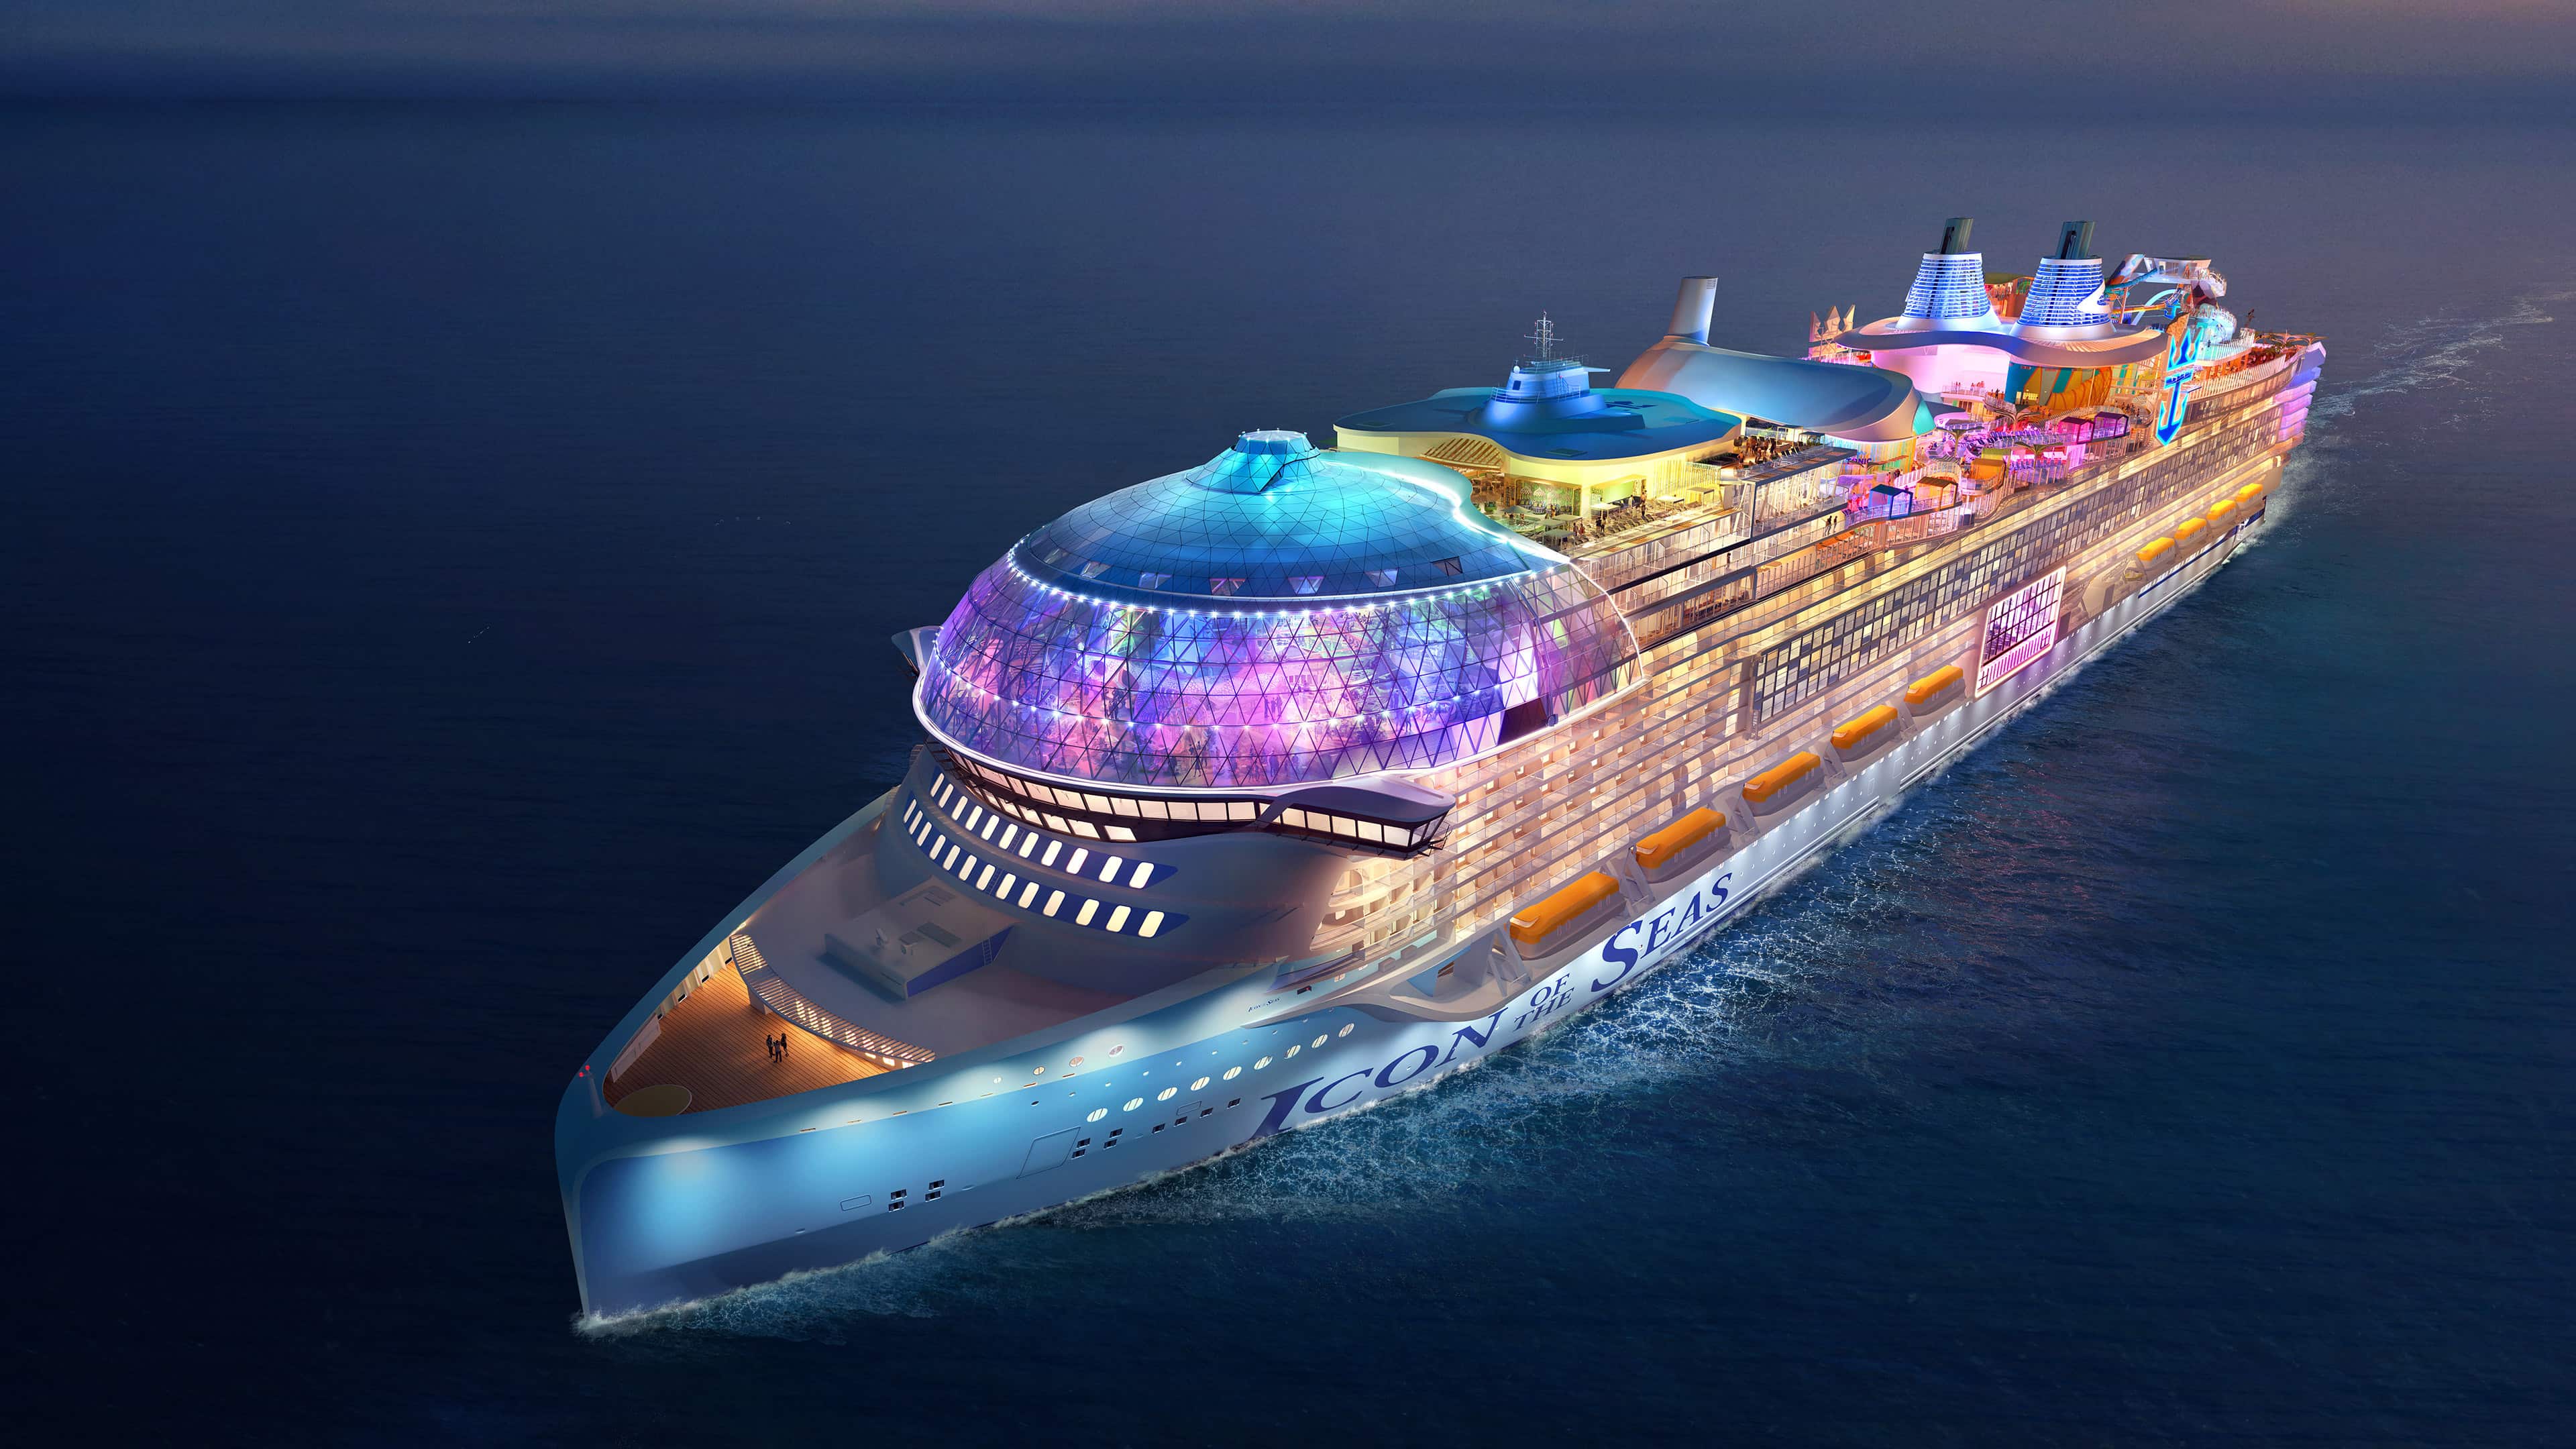 Icon of the Seas: Royal Caribbean's New Cruise Ship Will Be